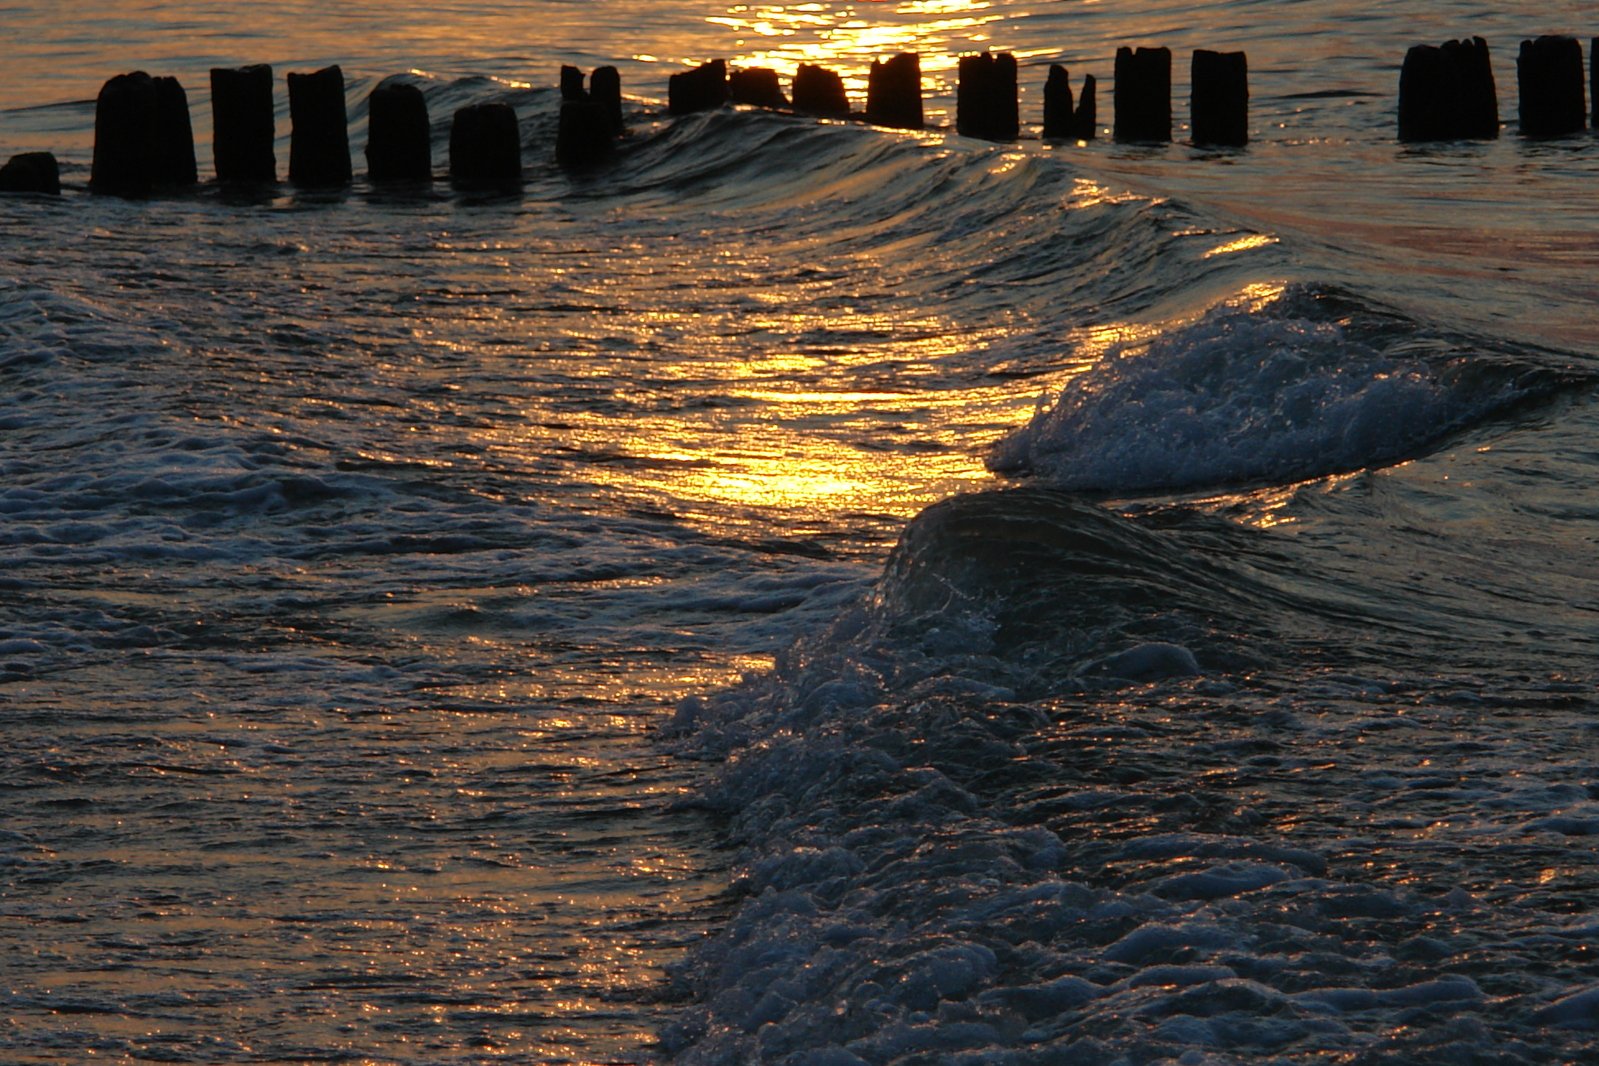 the waves come in to shore as the sun sets